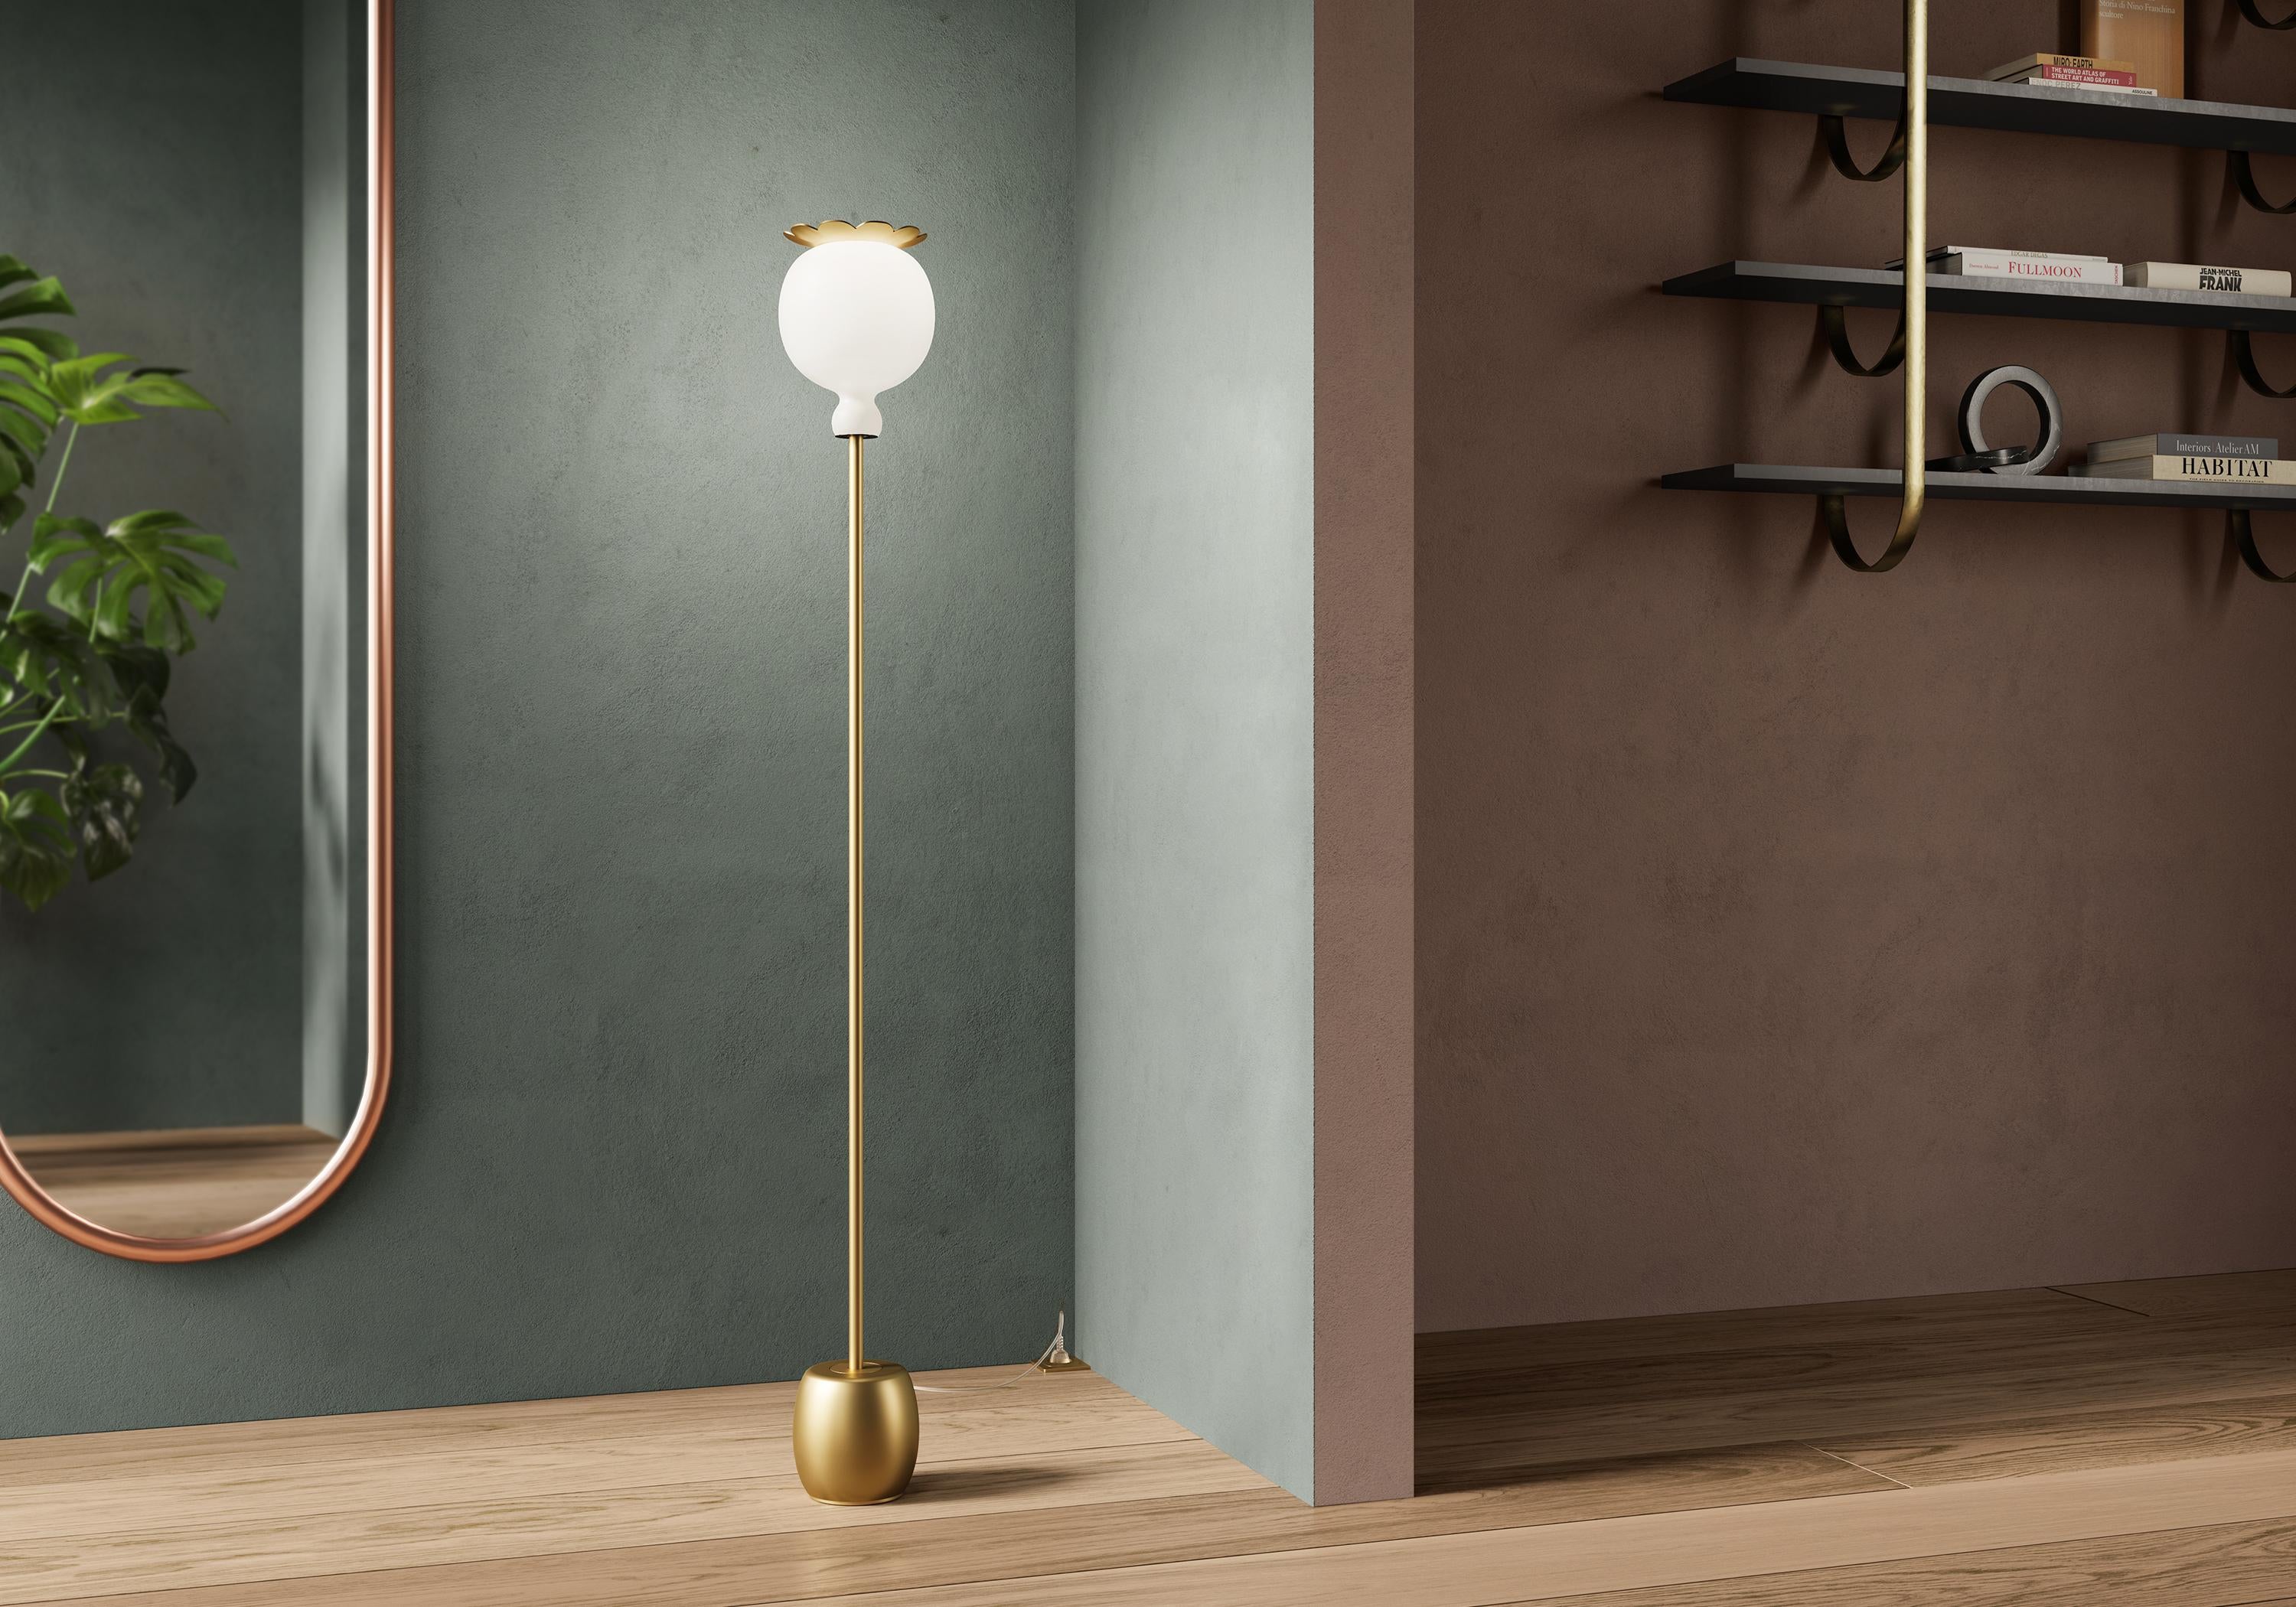 OPYO floor brass finish

The intelligence of nature with its perfect and unexpected forms is the inspiration behind the Opyo design. The delicate, clean lines of the poppy seed pod inspire the opal glass diffuser. It is supported by a long metal